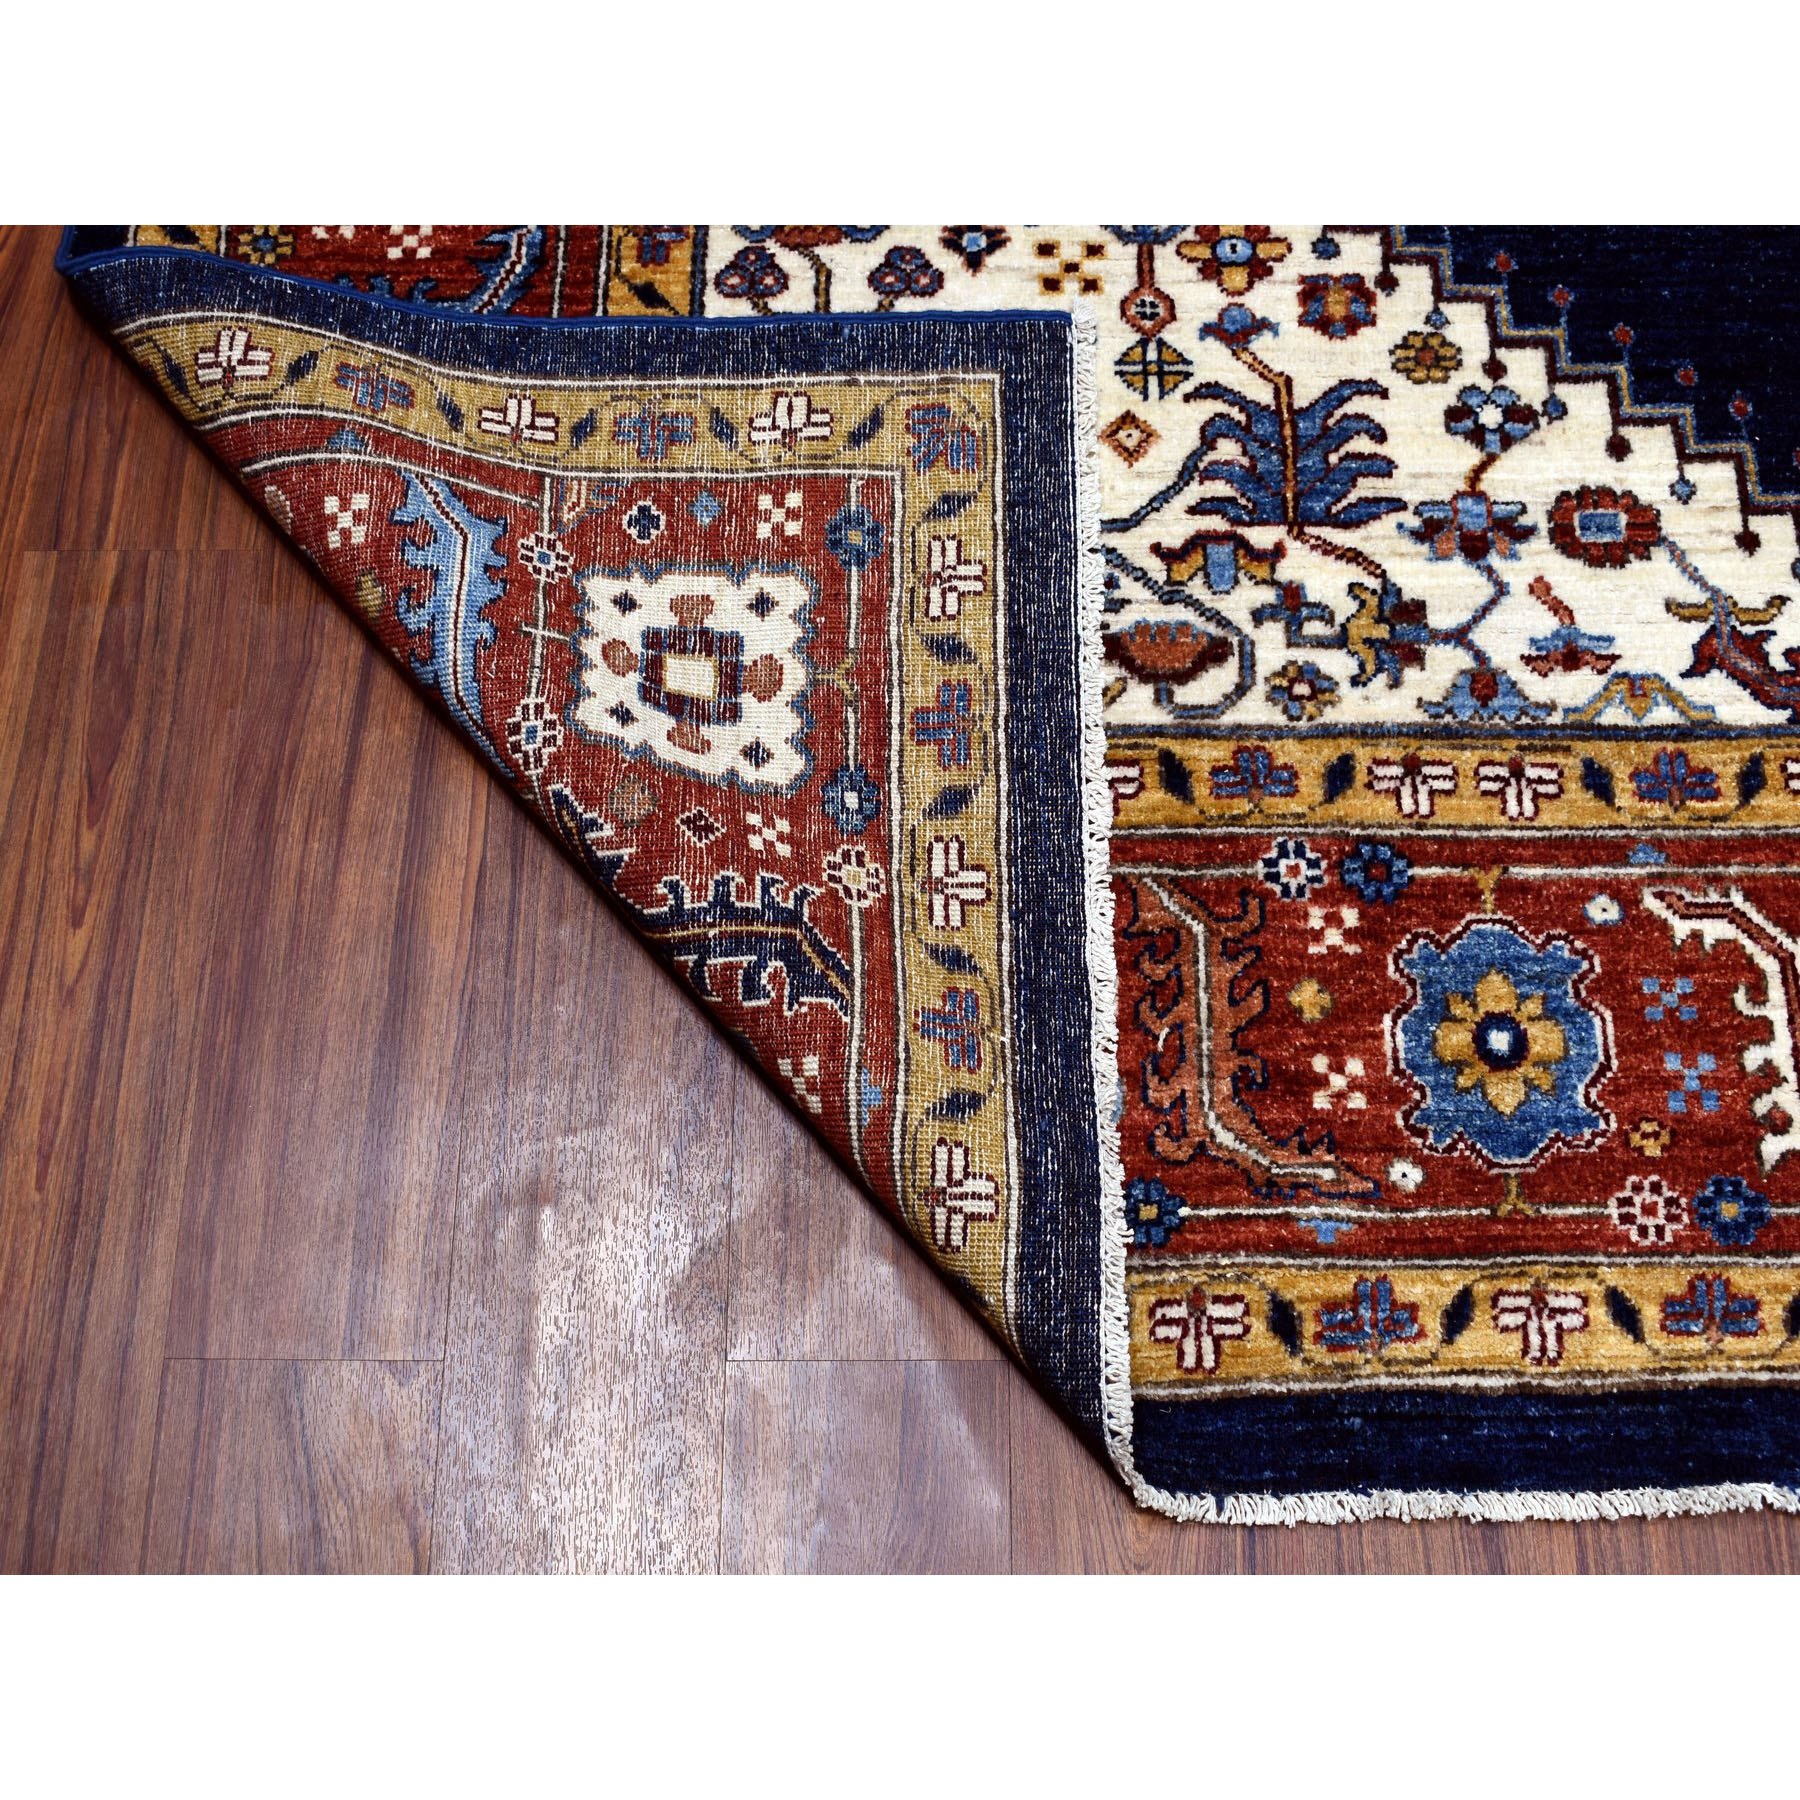 7-10 x9-5  Navy Blue Peshawar With Heriz Design Hand Knotted Pure Wool Oriental Rug 